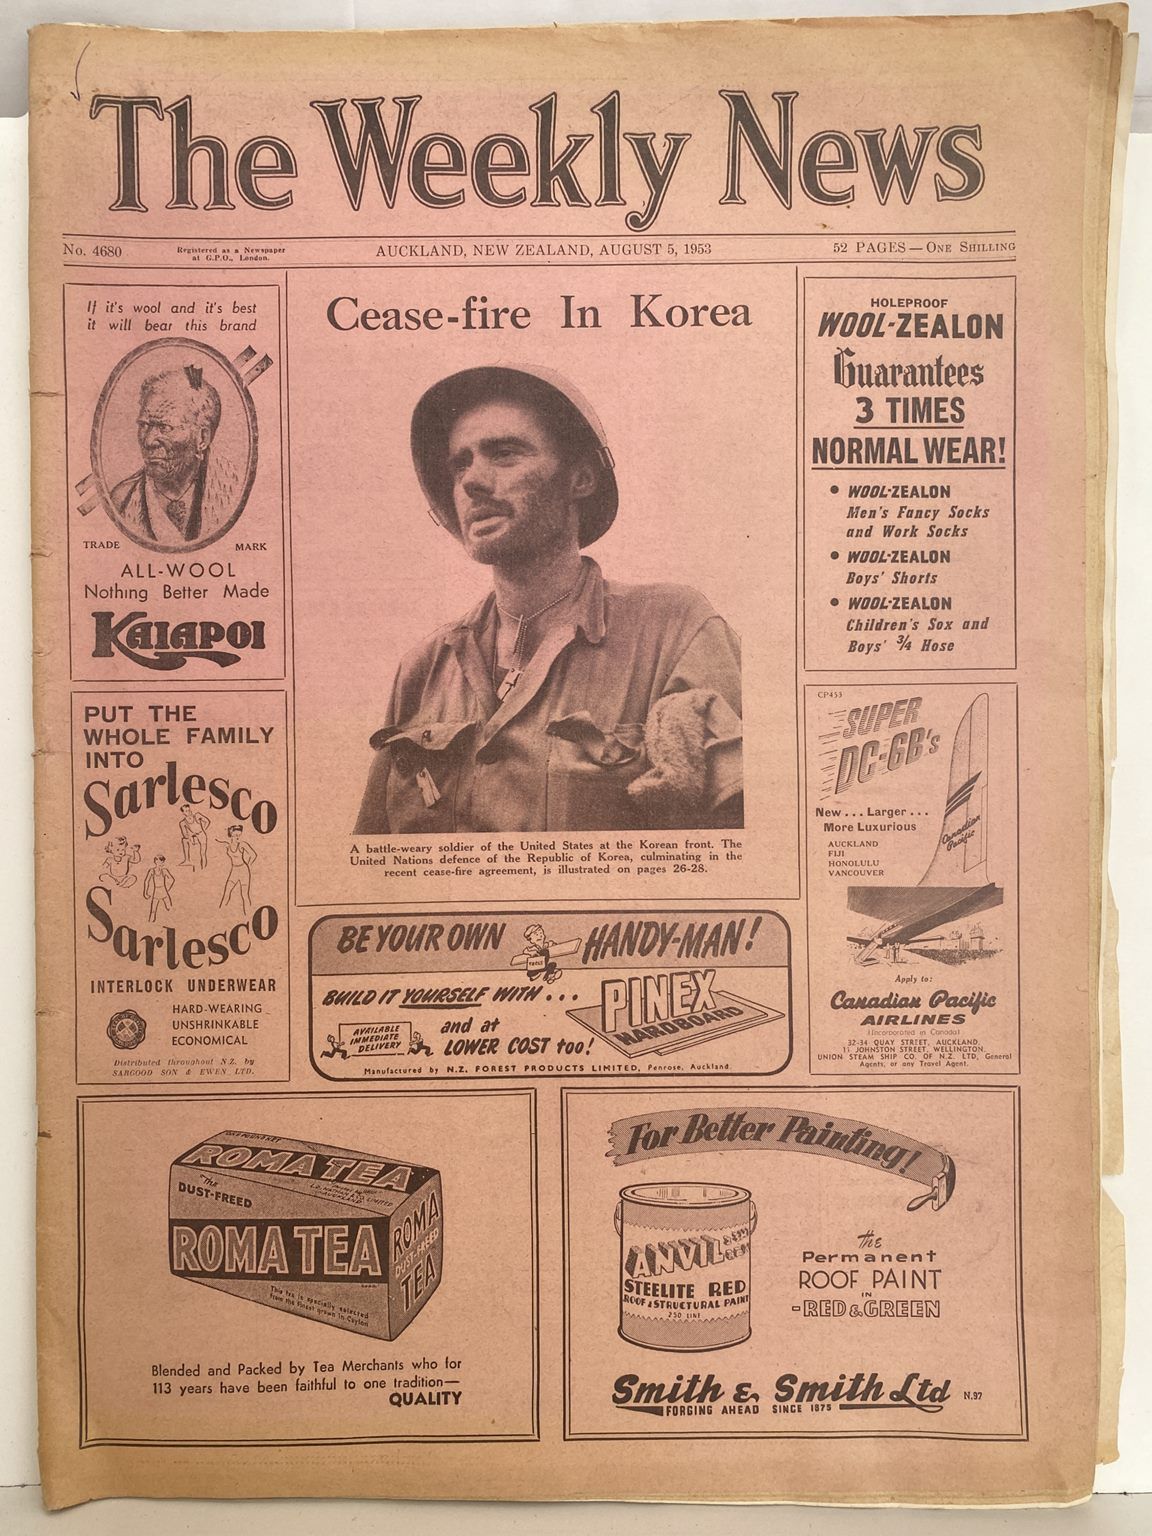 OLD NEWSPAPER: The Weekly News - 5 August 1953